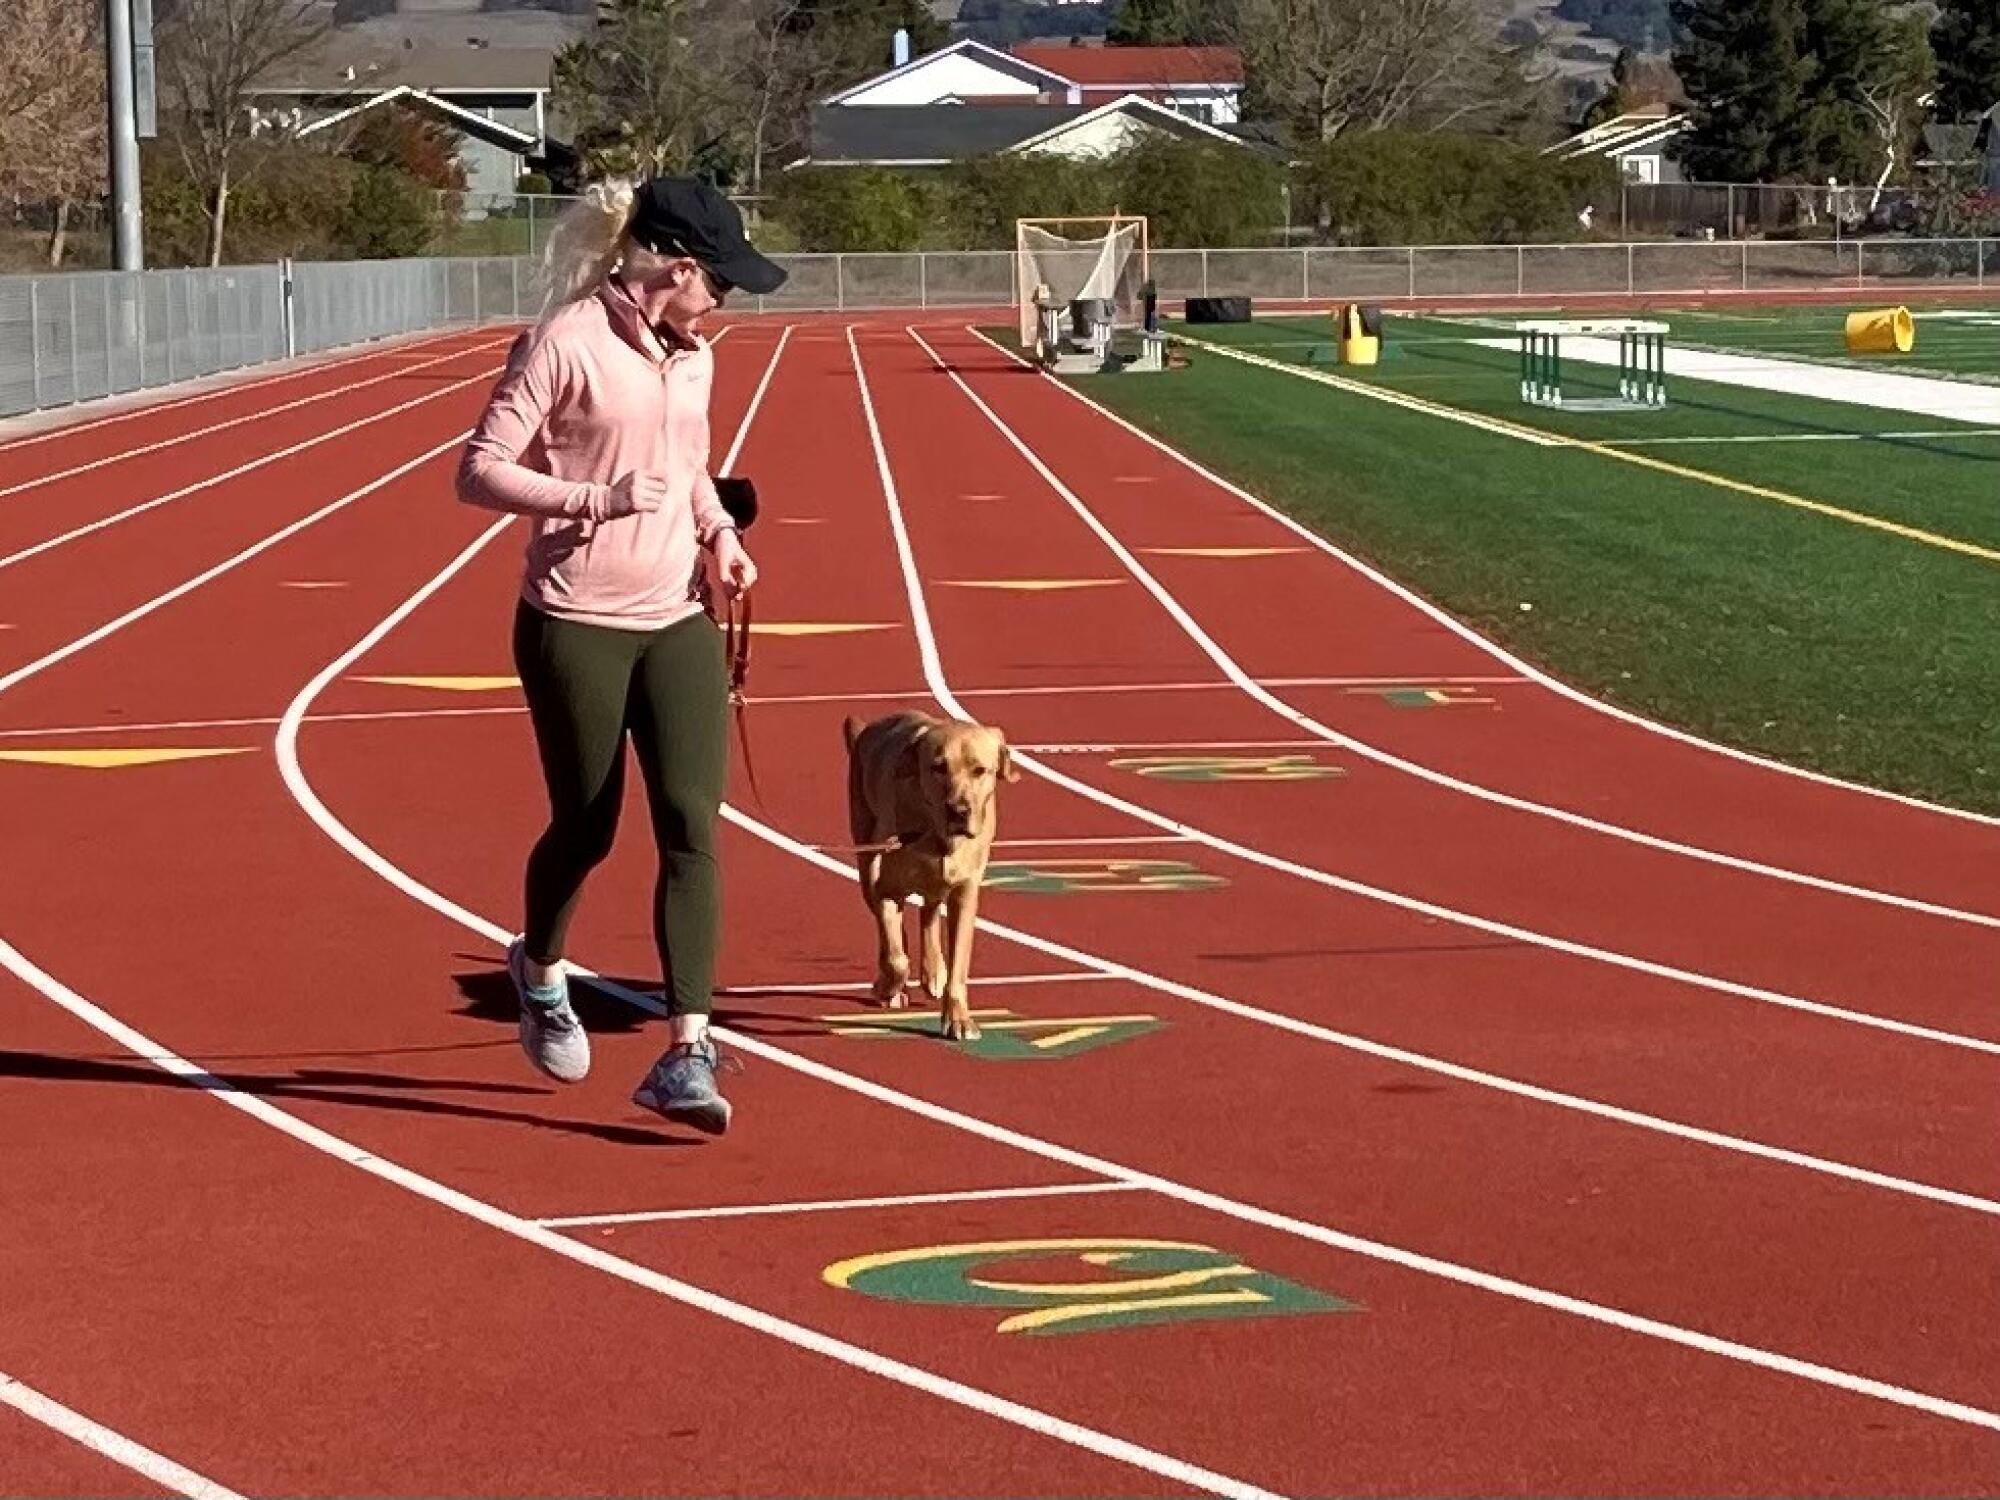 Kim Crosby and guide dog Tron have a routine at the track.